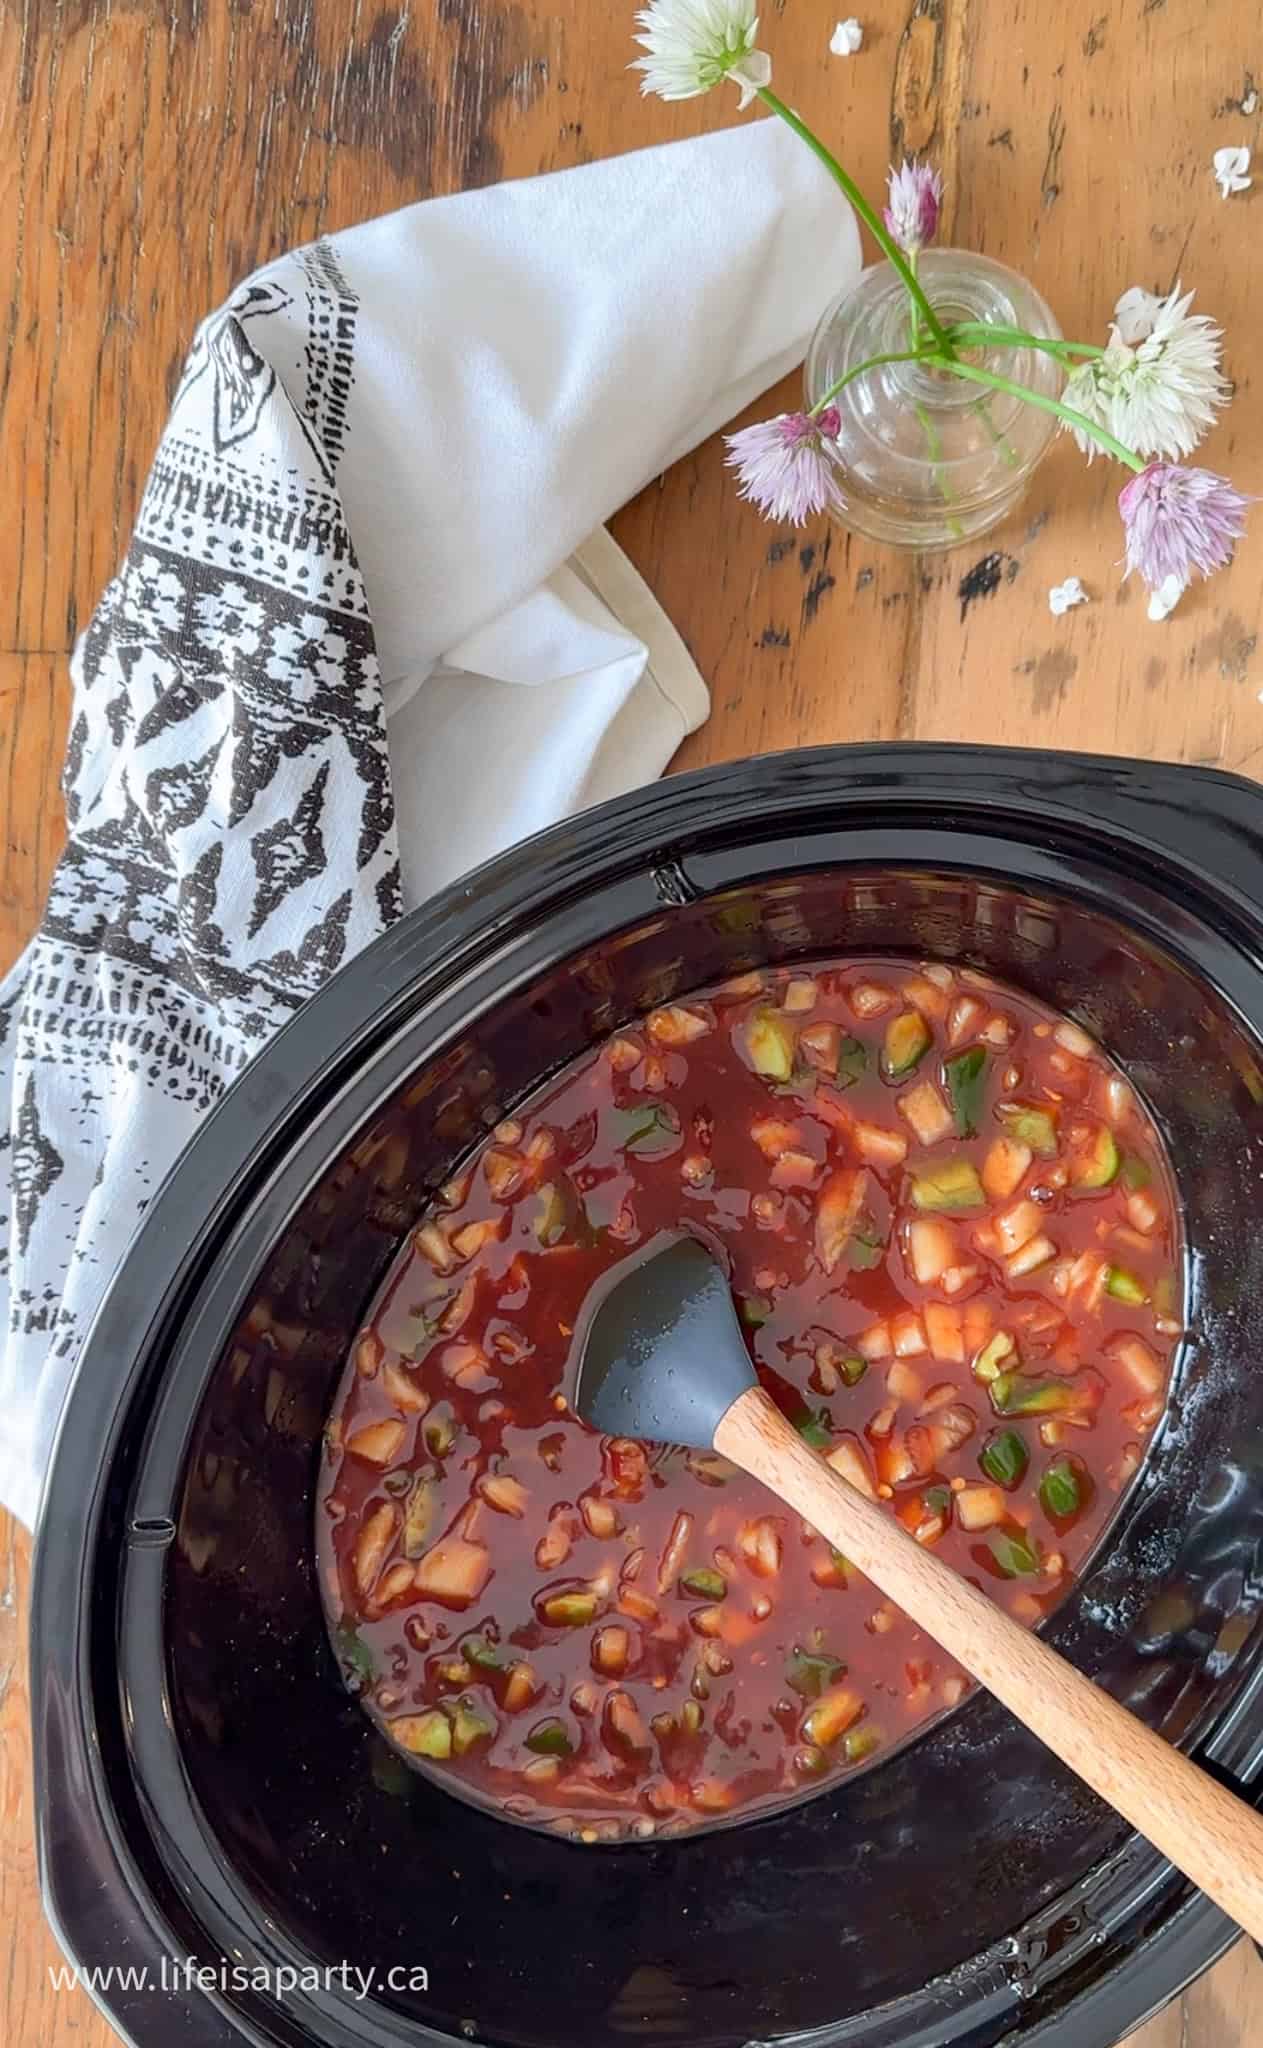 How to make Baked Beans in a slow cooker